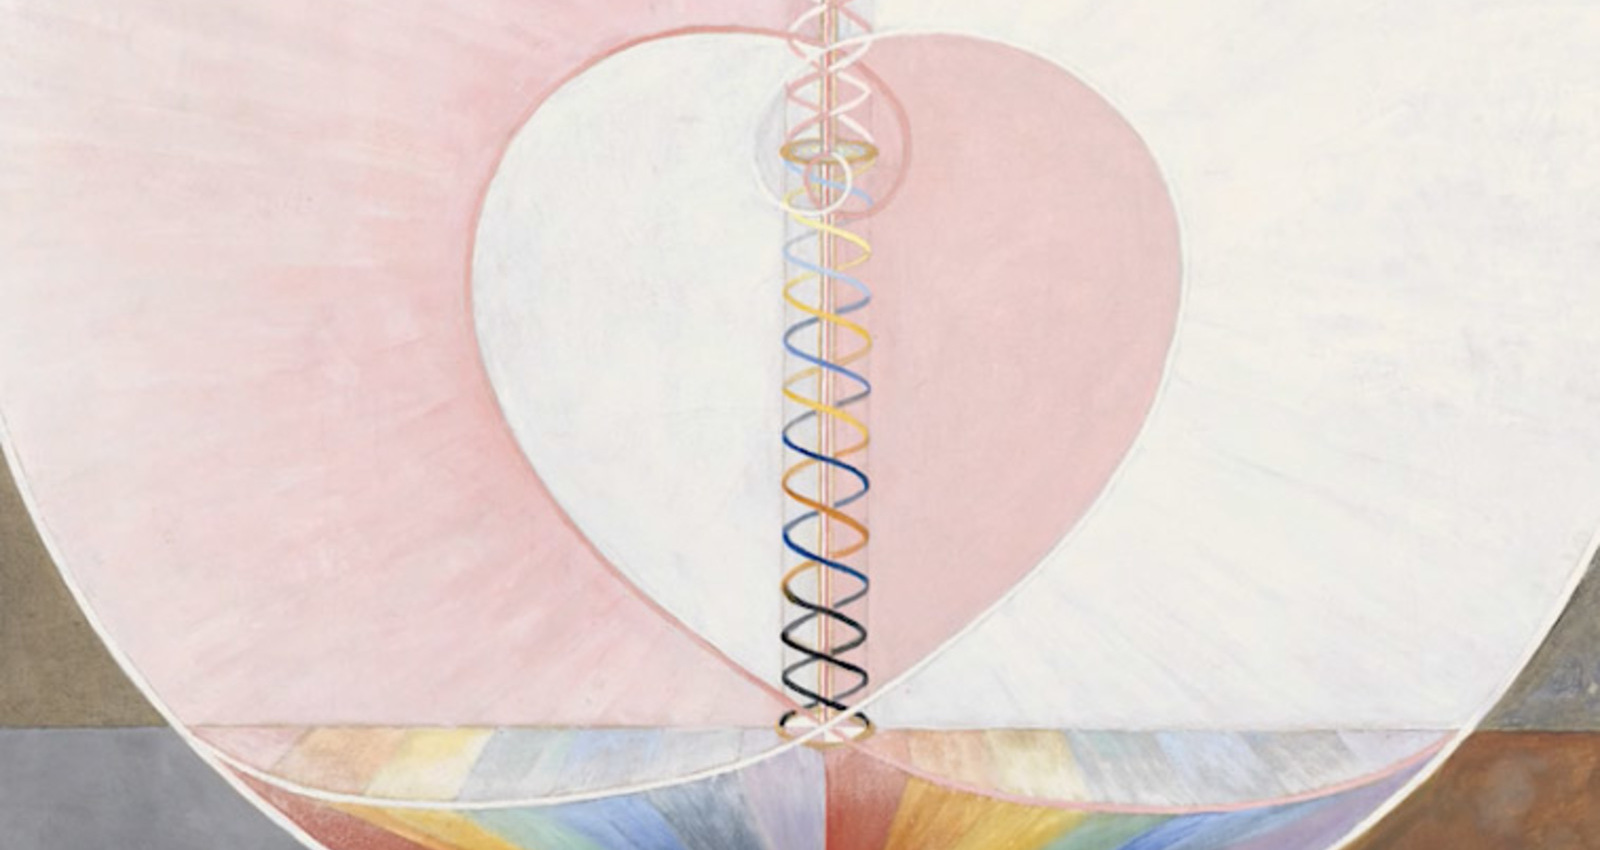 Hilma af Klint Paintings for the Future